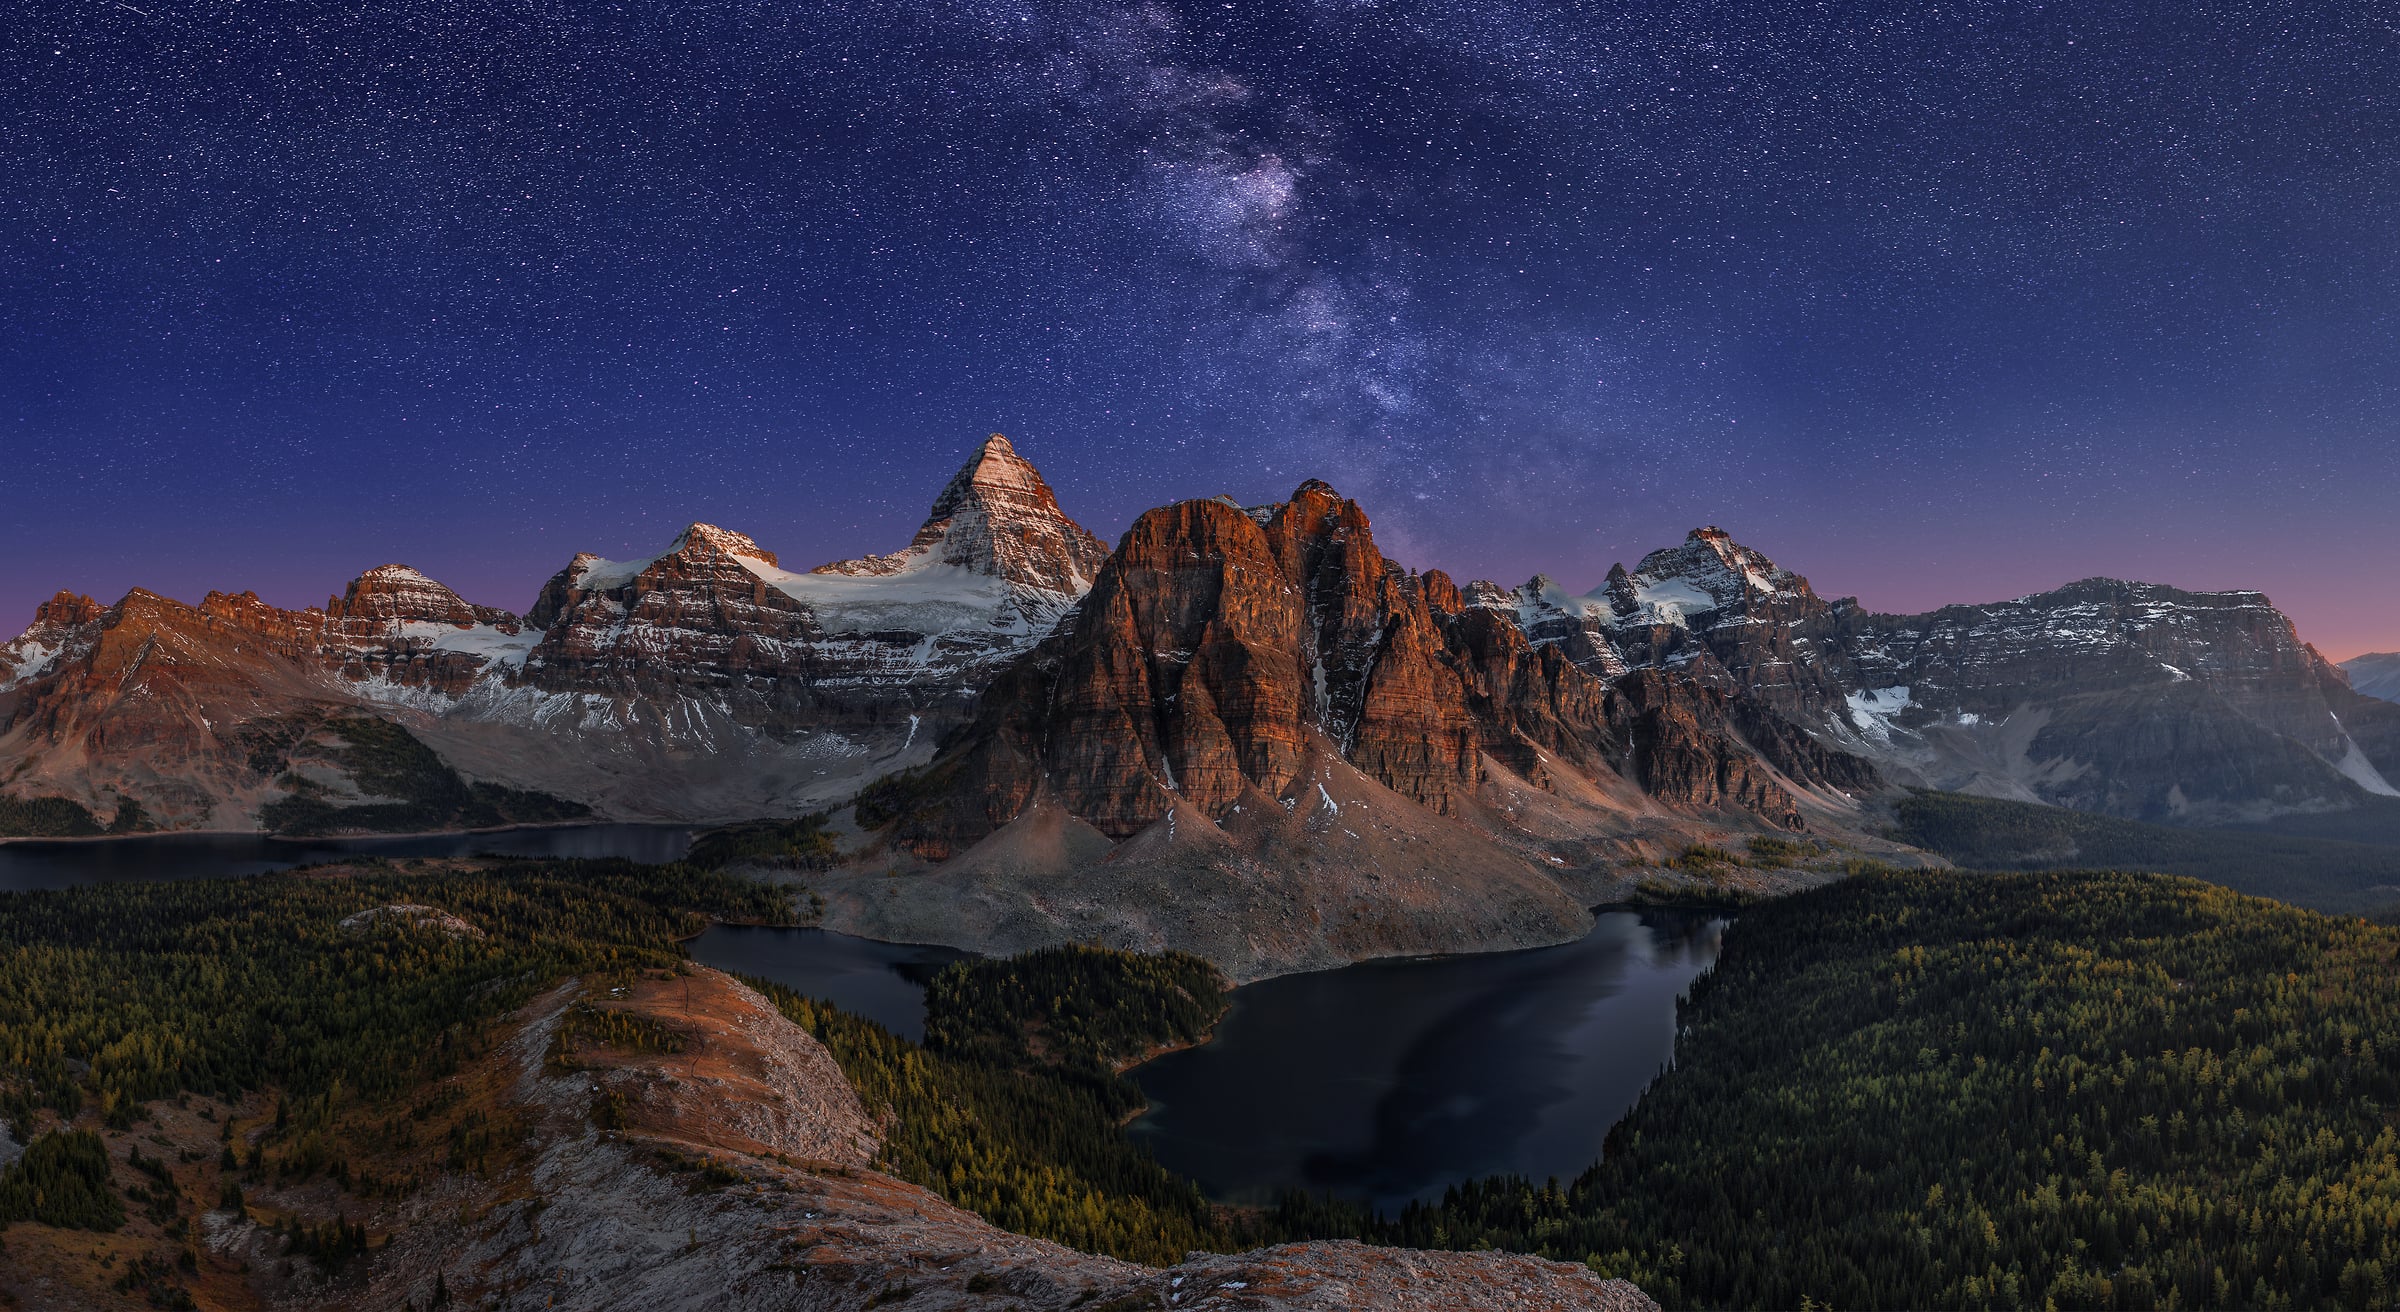 630 megapixels! A very high resolution, large-format VAST photo print of mountains, lakes, the milky way, stars, and Mount Assiniboine; fine art landscape photo created by Chris Collacott in Assiniboine Provinical Park, British Columbia, Canada